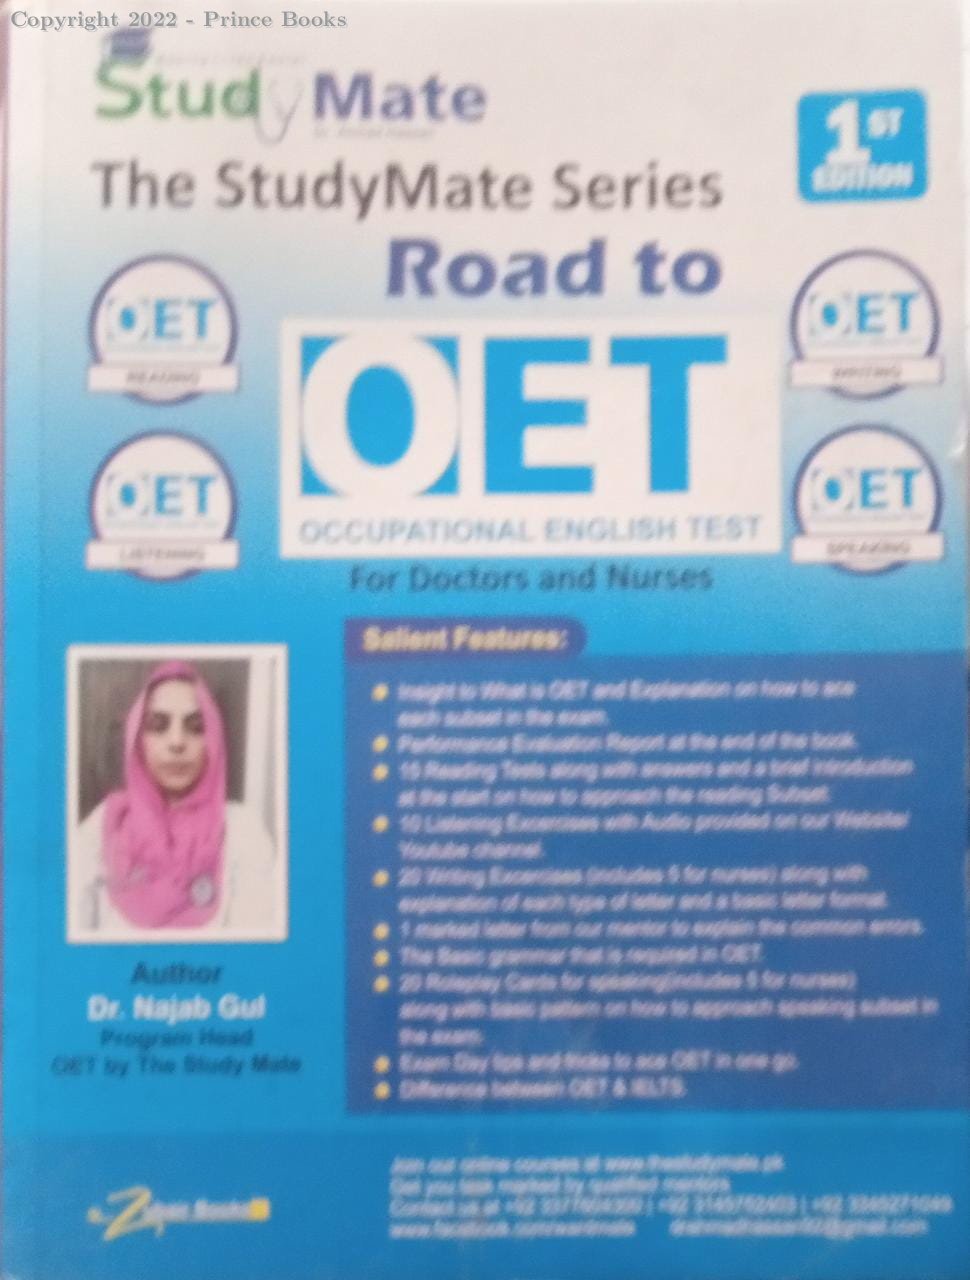 the studymate series road to oet, 1e